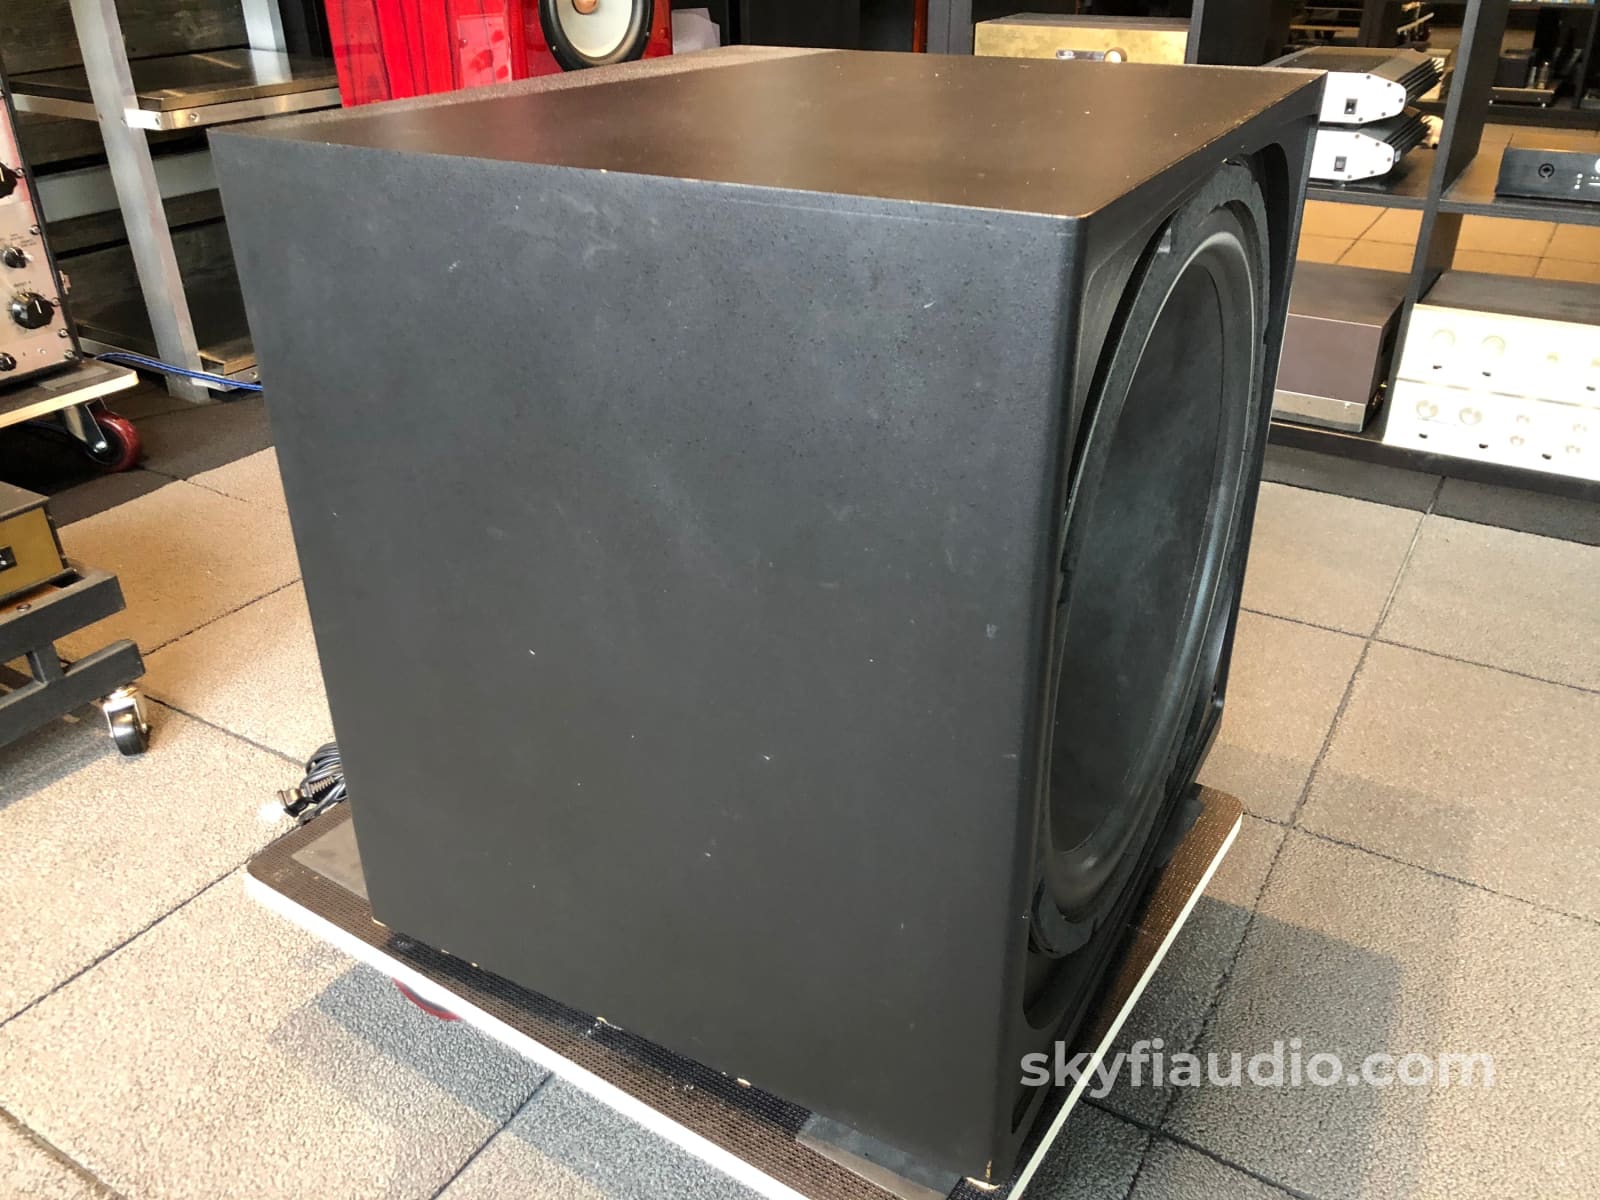 Triad Inroom Powersub Subwoofer - Massive 15 Driver And 300W Amp Thx Certified Speakers